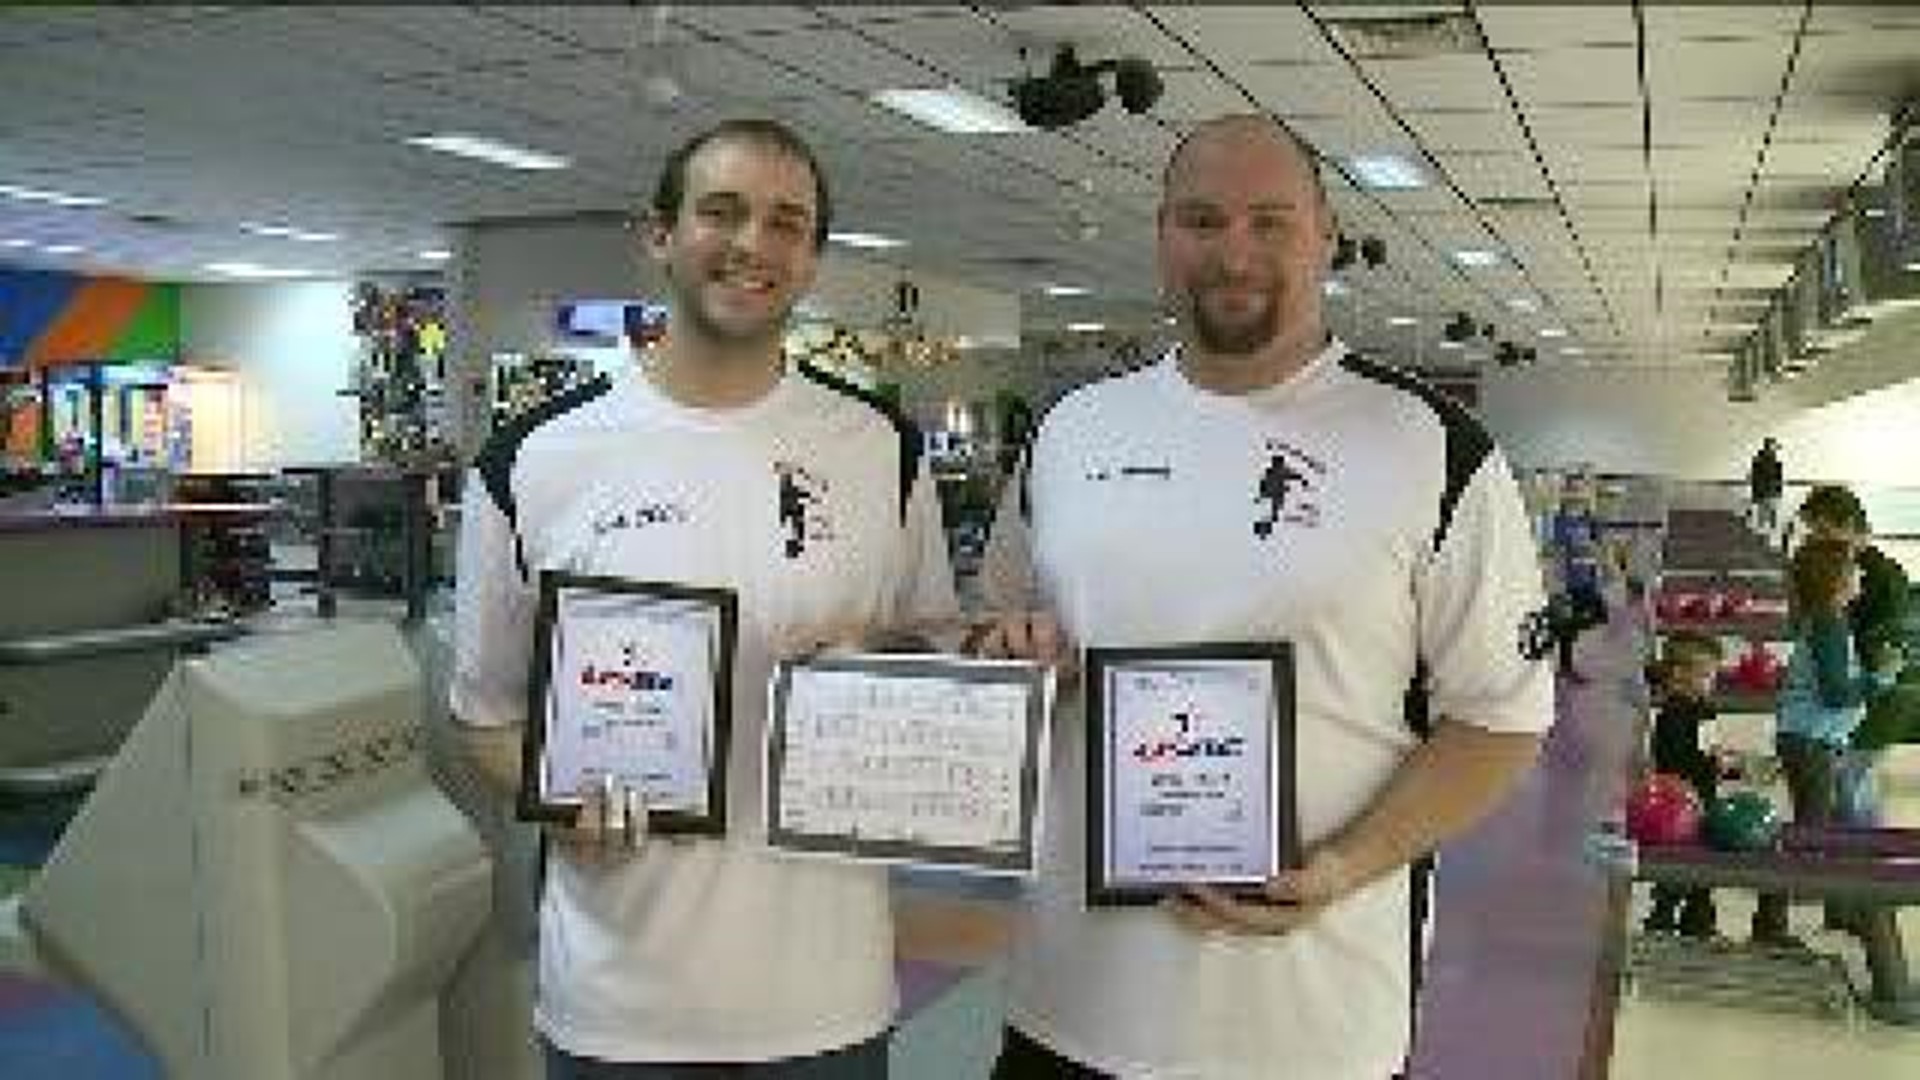 Schuylkill County Team With Bowling Record